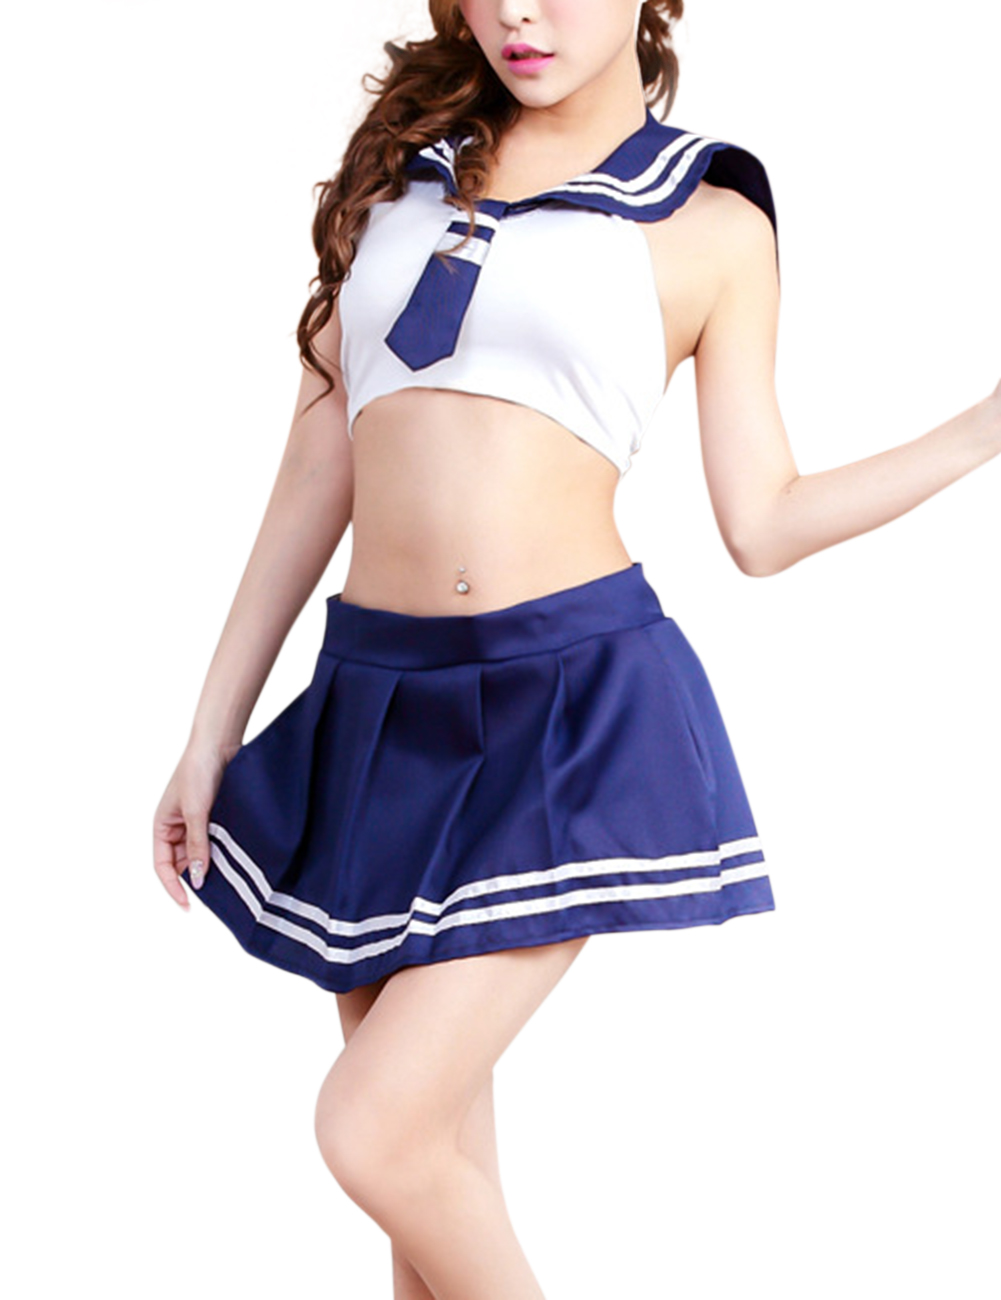 Women Sexy Lingerie School Uniform Adult Charming Short Backless Tops+Short Skirt Cosplay Outfit blue_one size